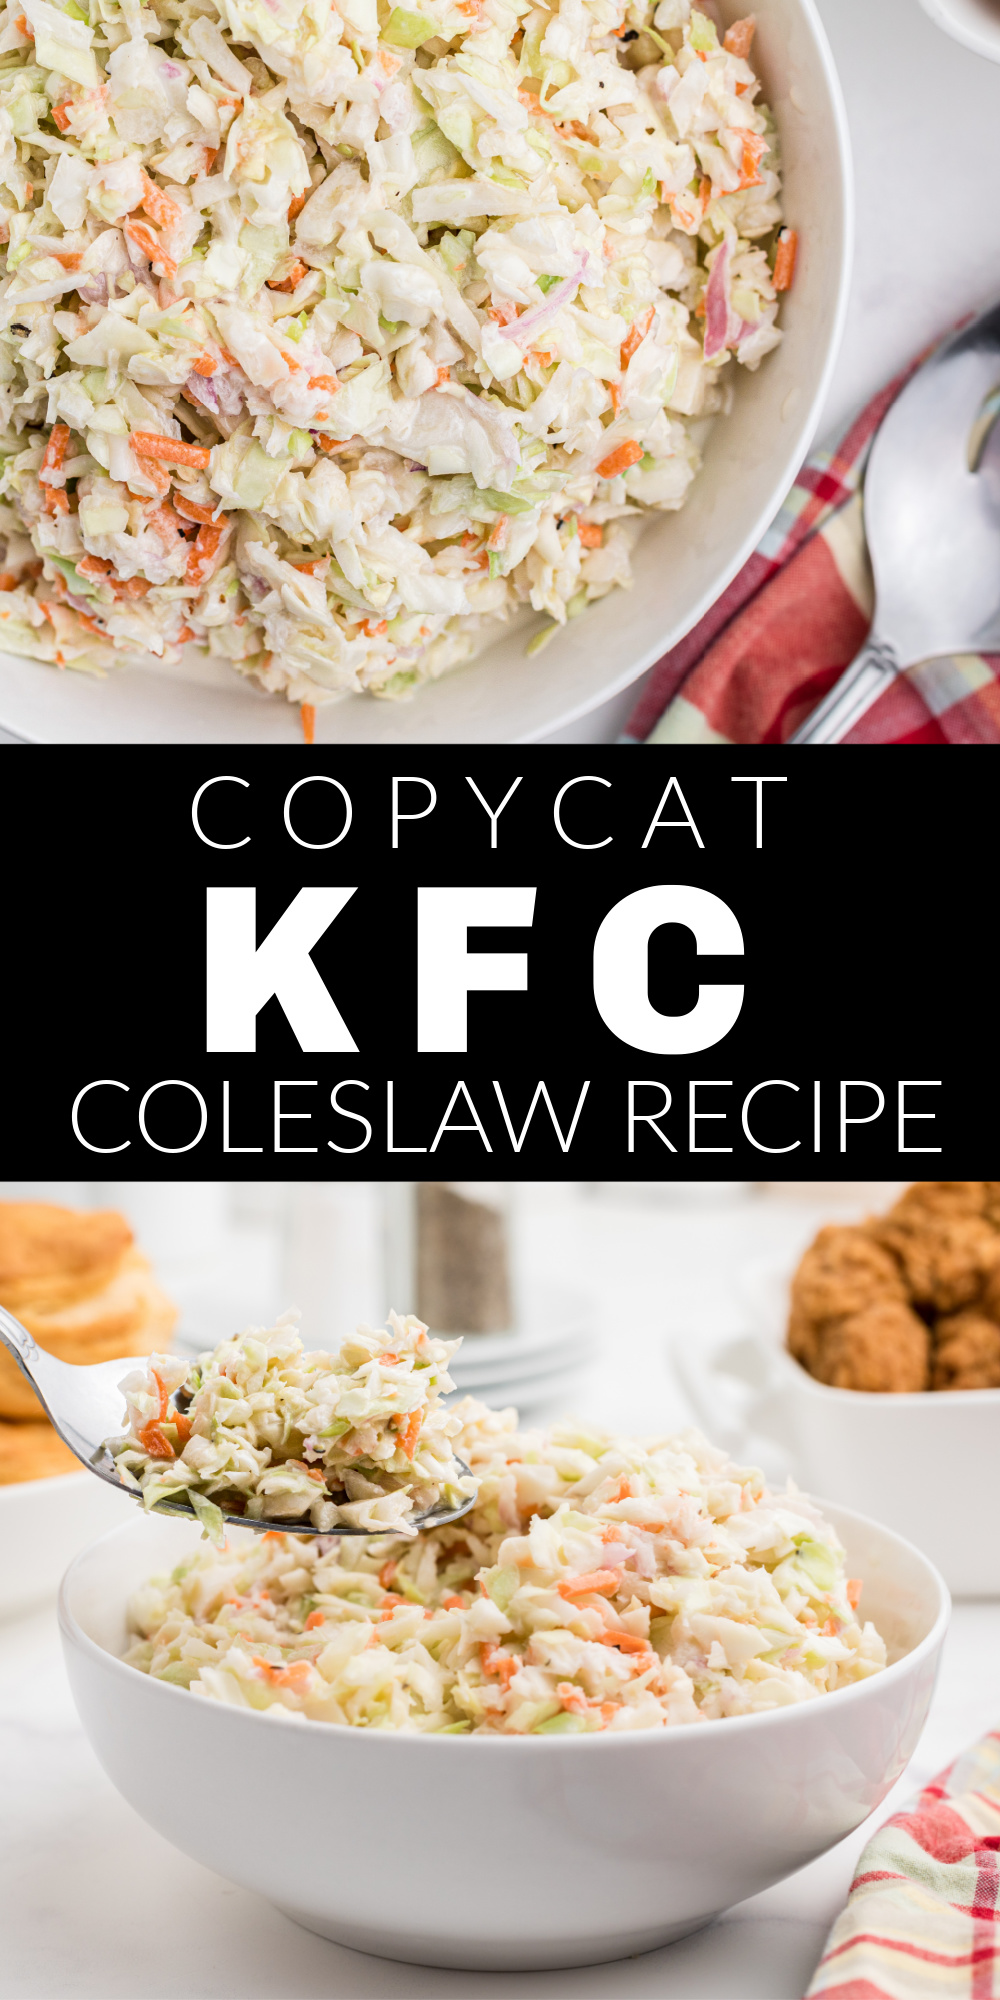 This easy copycat KFC Coleslaw recipe is the perfect side dish! It's so close to the real thing that no one will ever know it was made in your own kitchen. This homemade coleslaw recipe is one of my favorite things to add as a side or a simple snack, and it's perfect for a summer bbq.